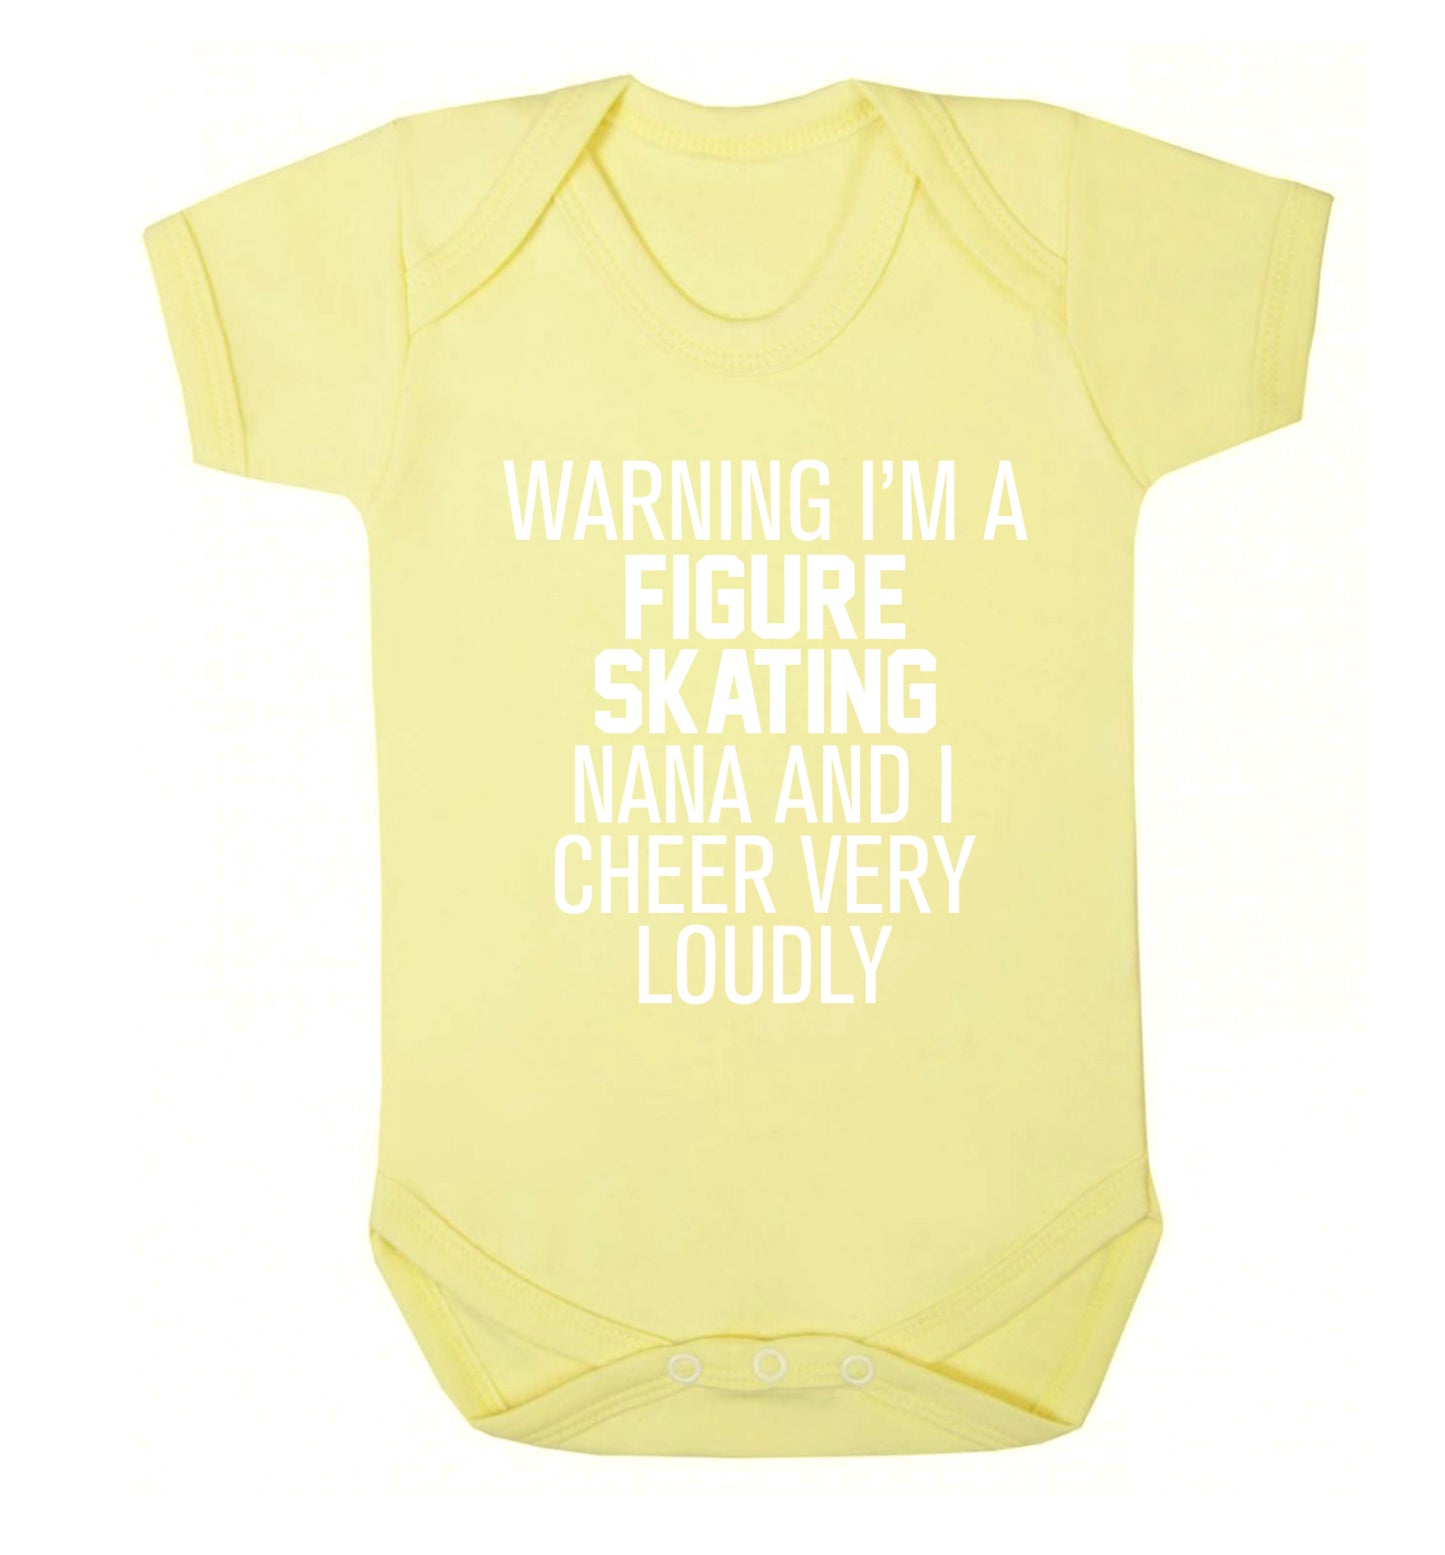 Warning I'm a figure skating nana and I cheer very loudly Baby Vest pale yellow 18-24 months